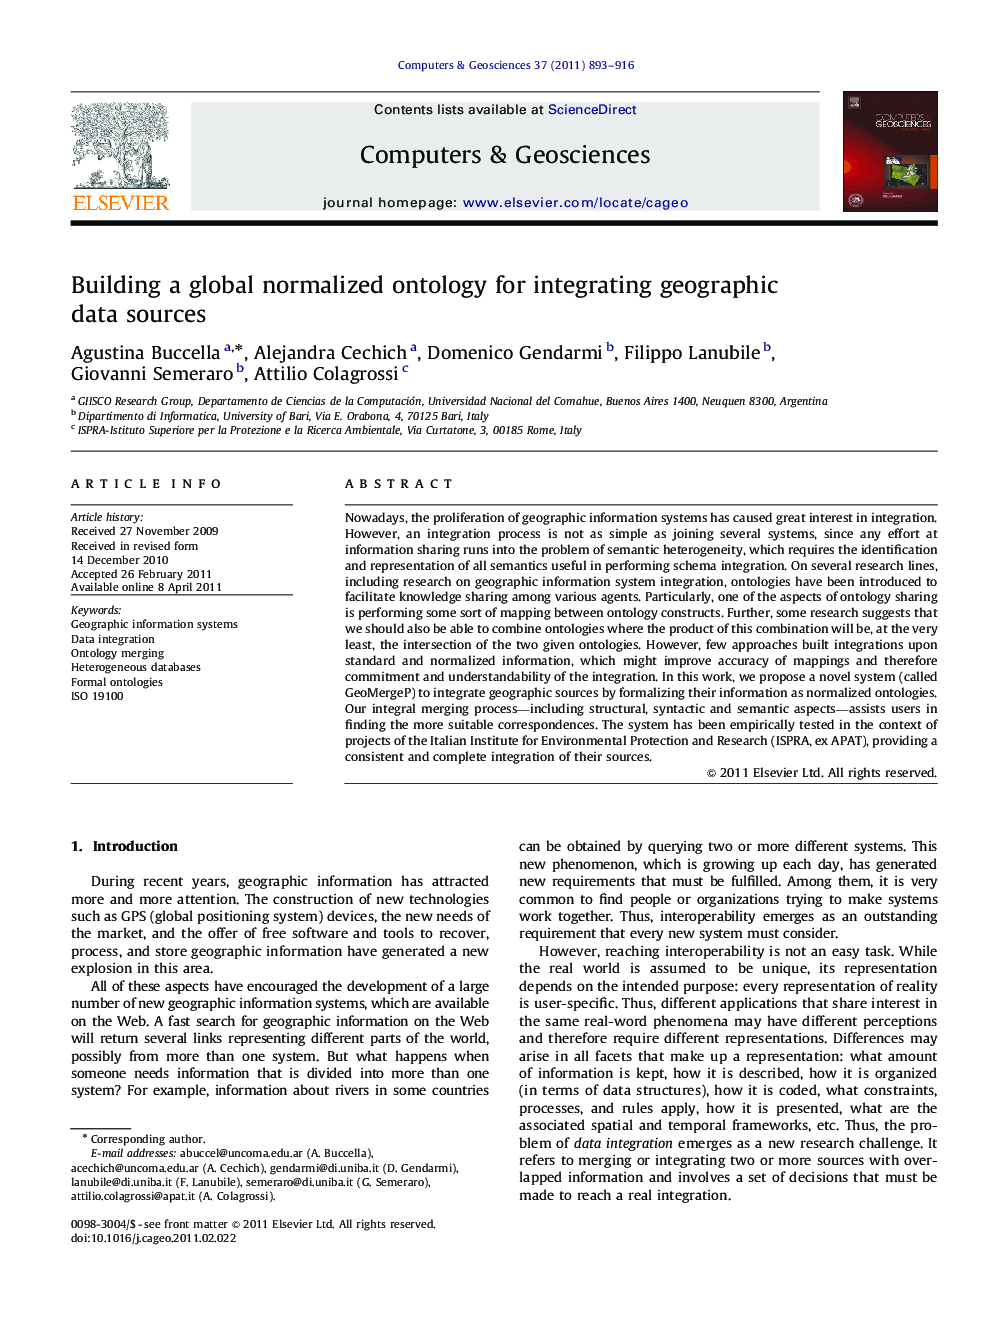 Building a global normalized ontology for integrating geographic data sources